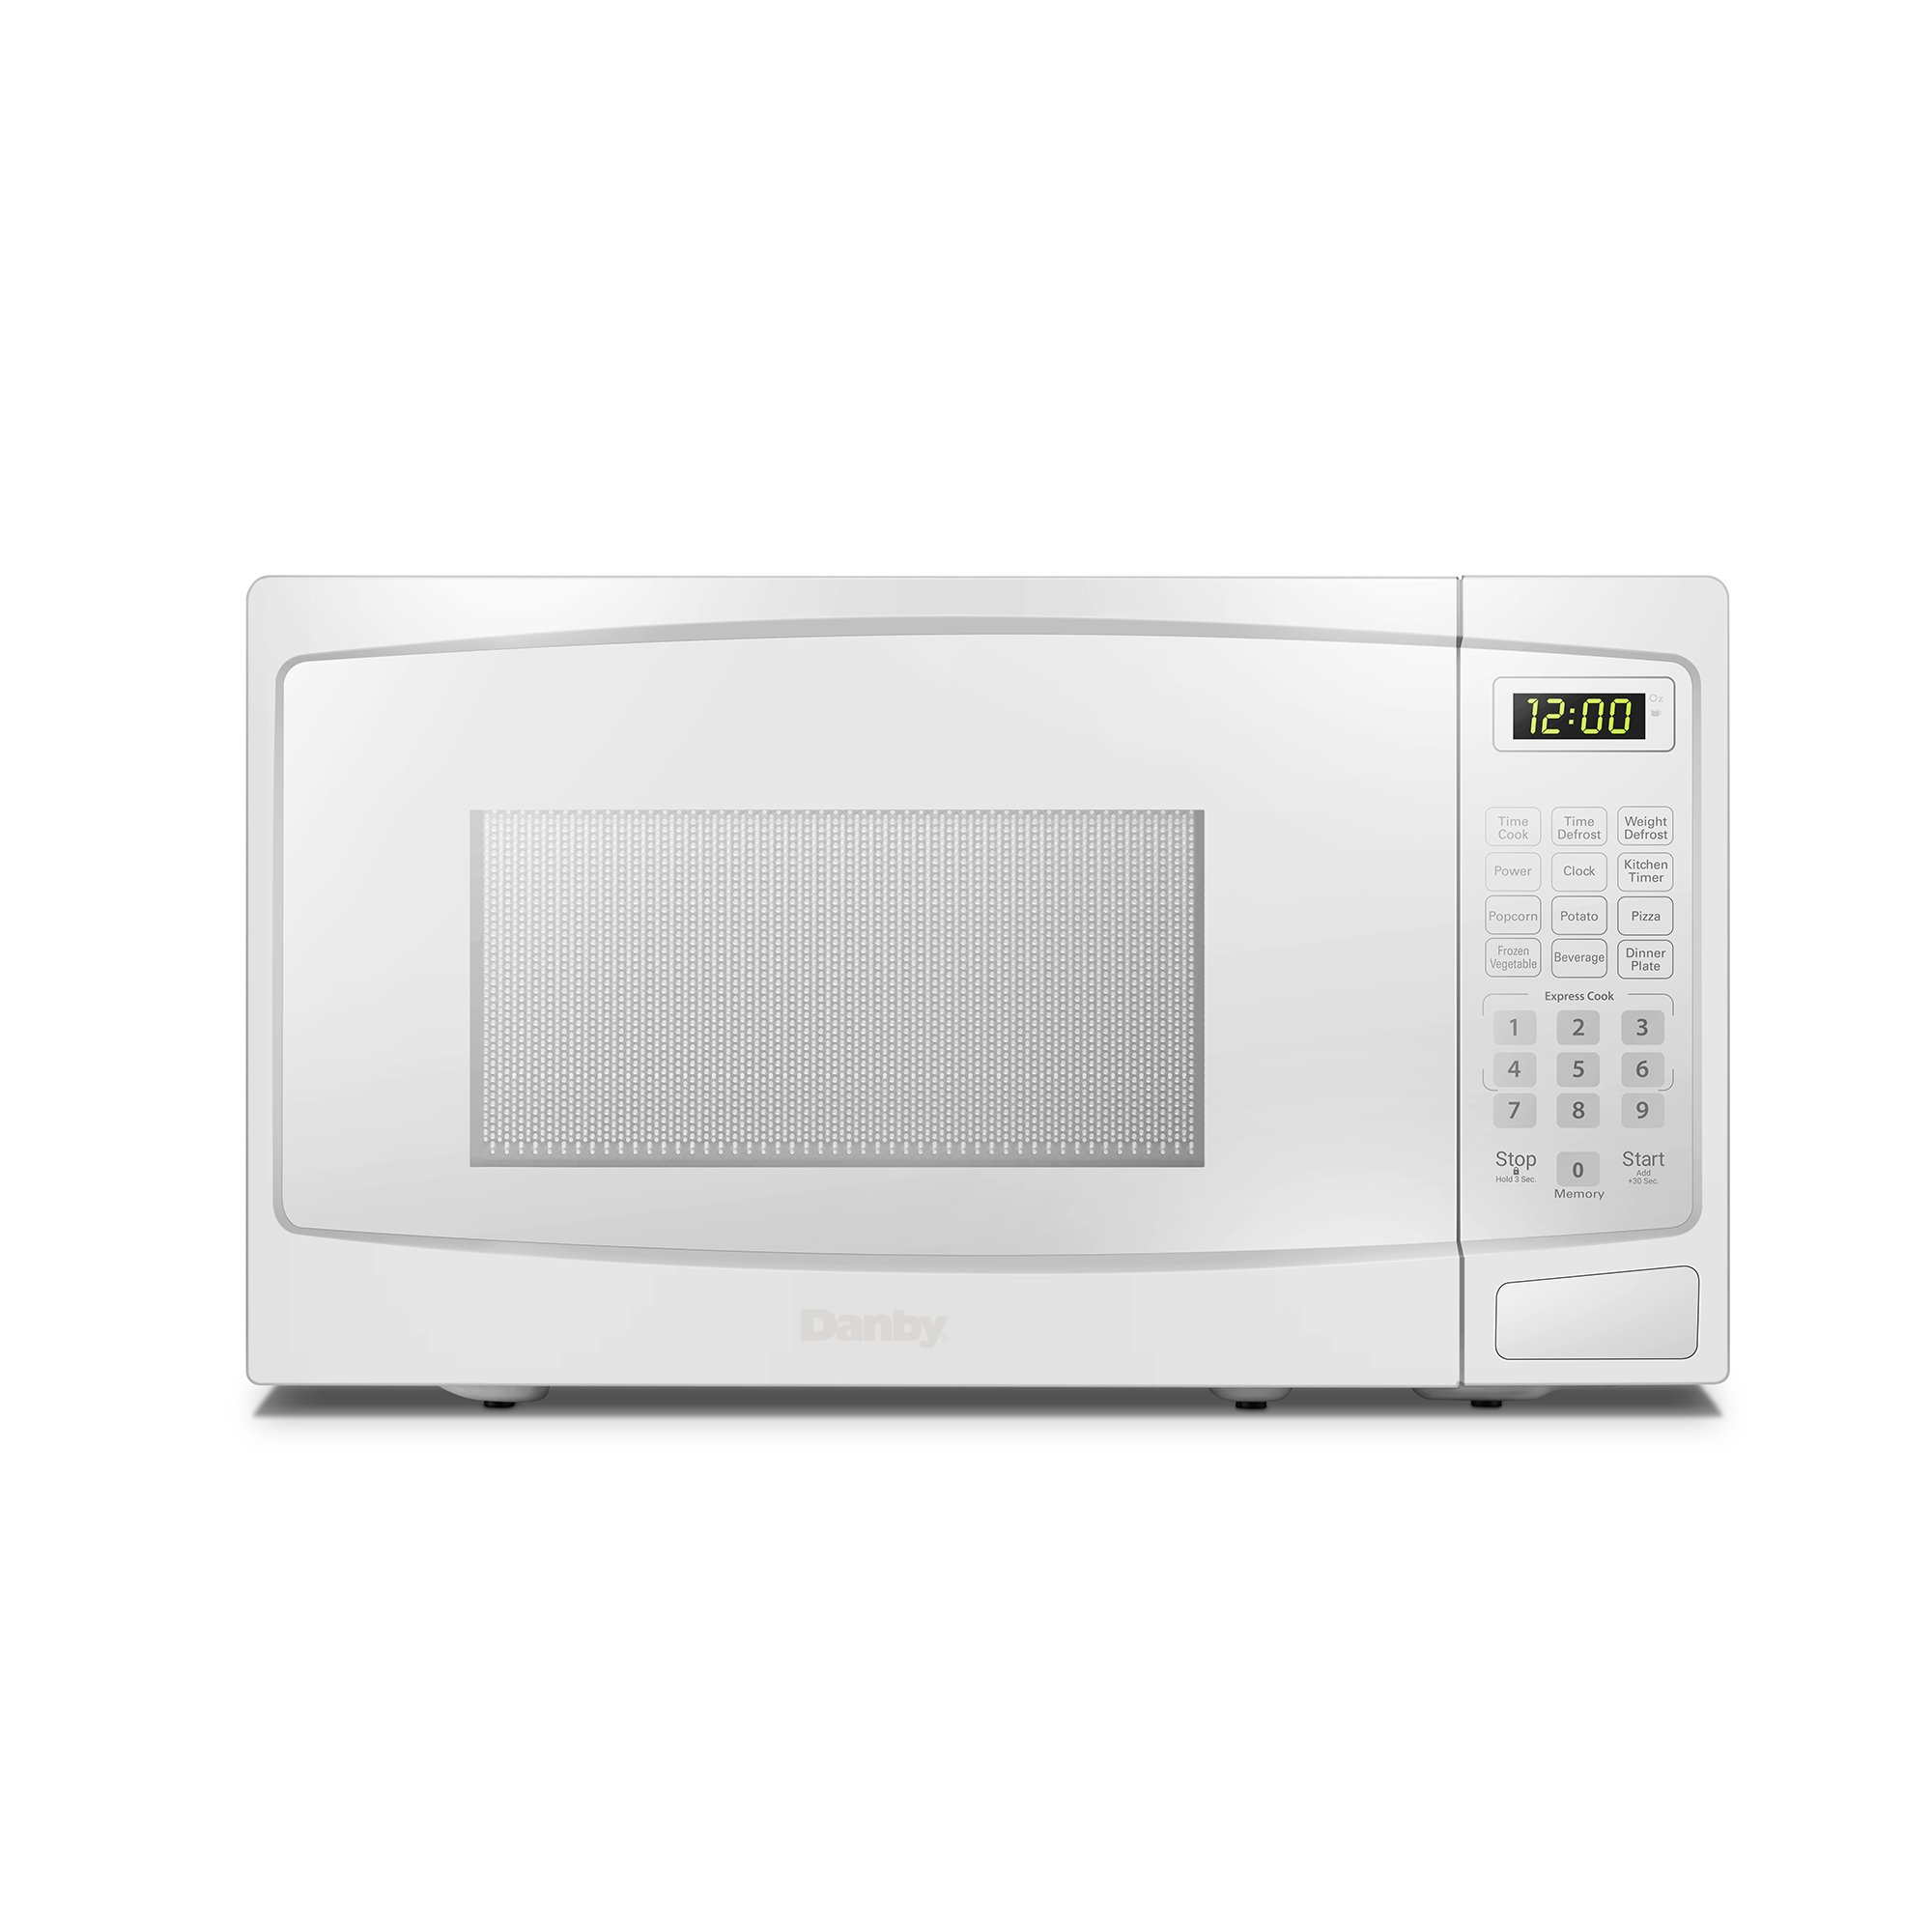 0.7 Cu. Ft. Danby Microwave - White 